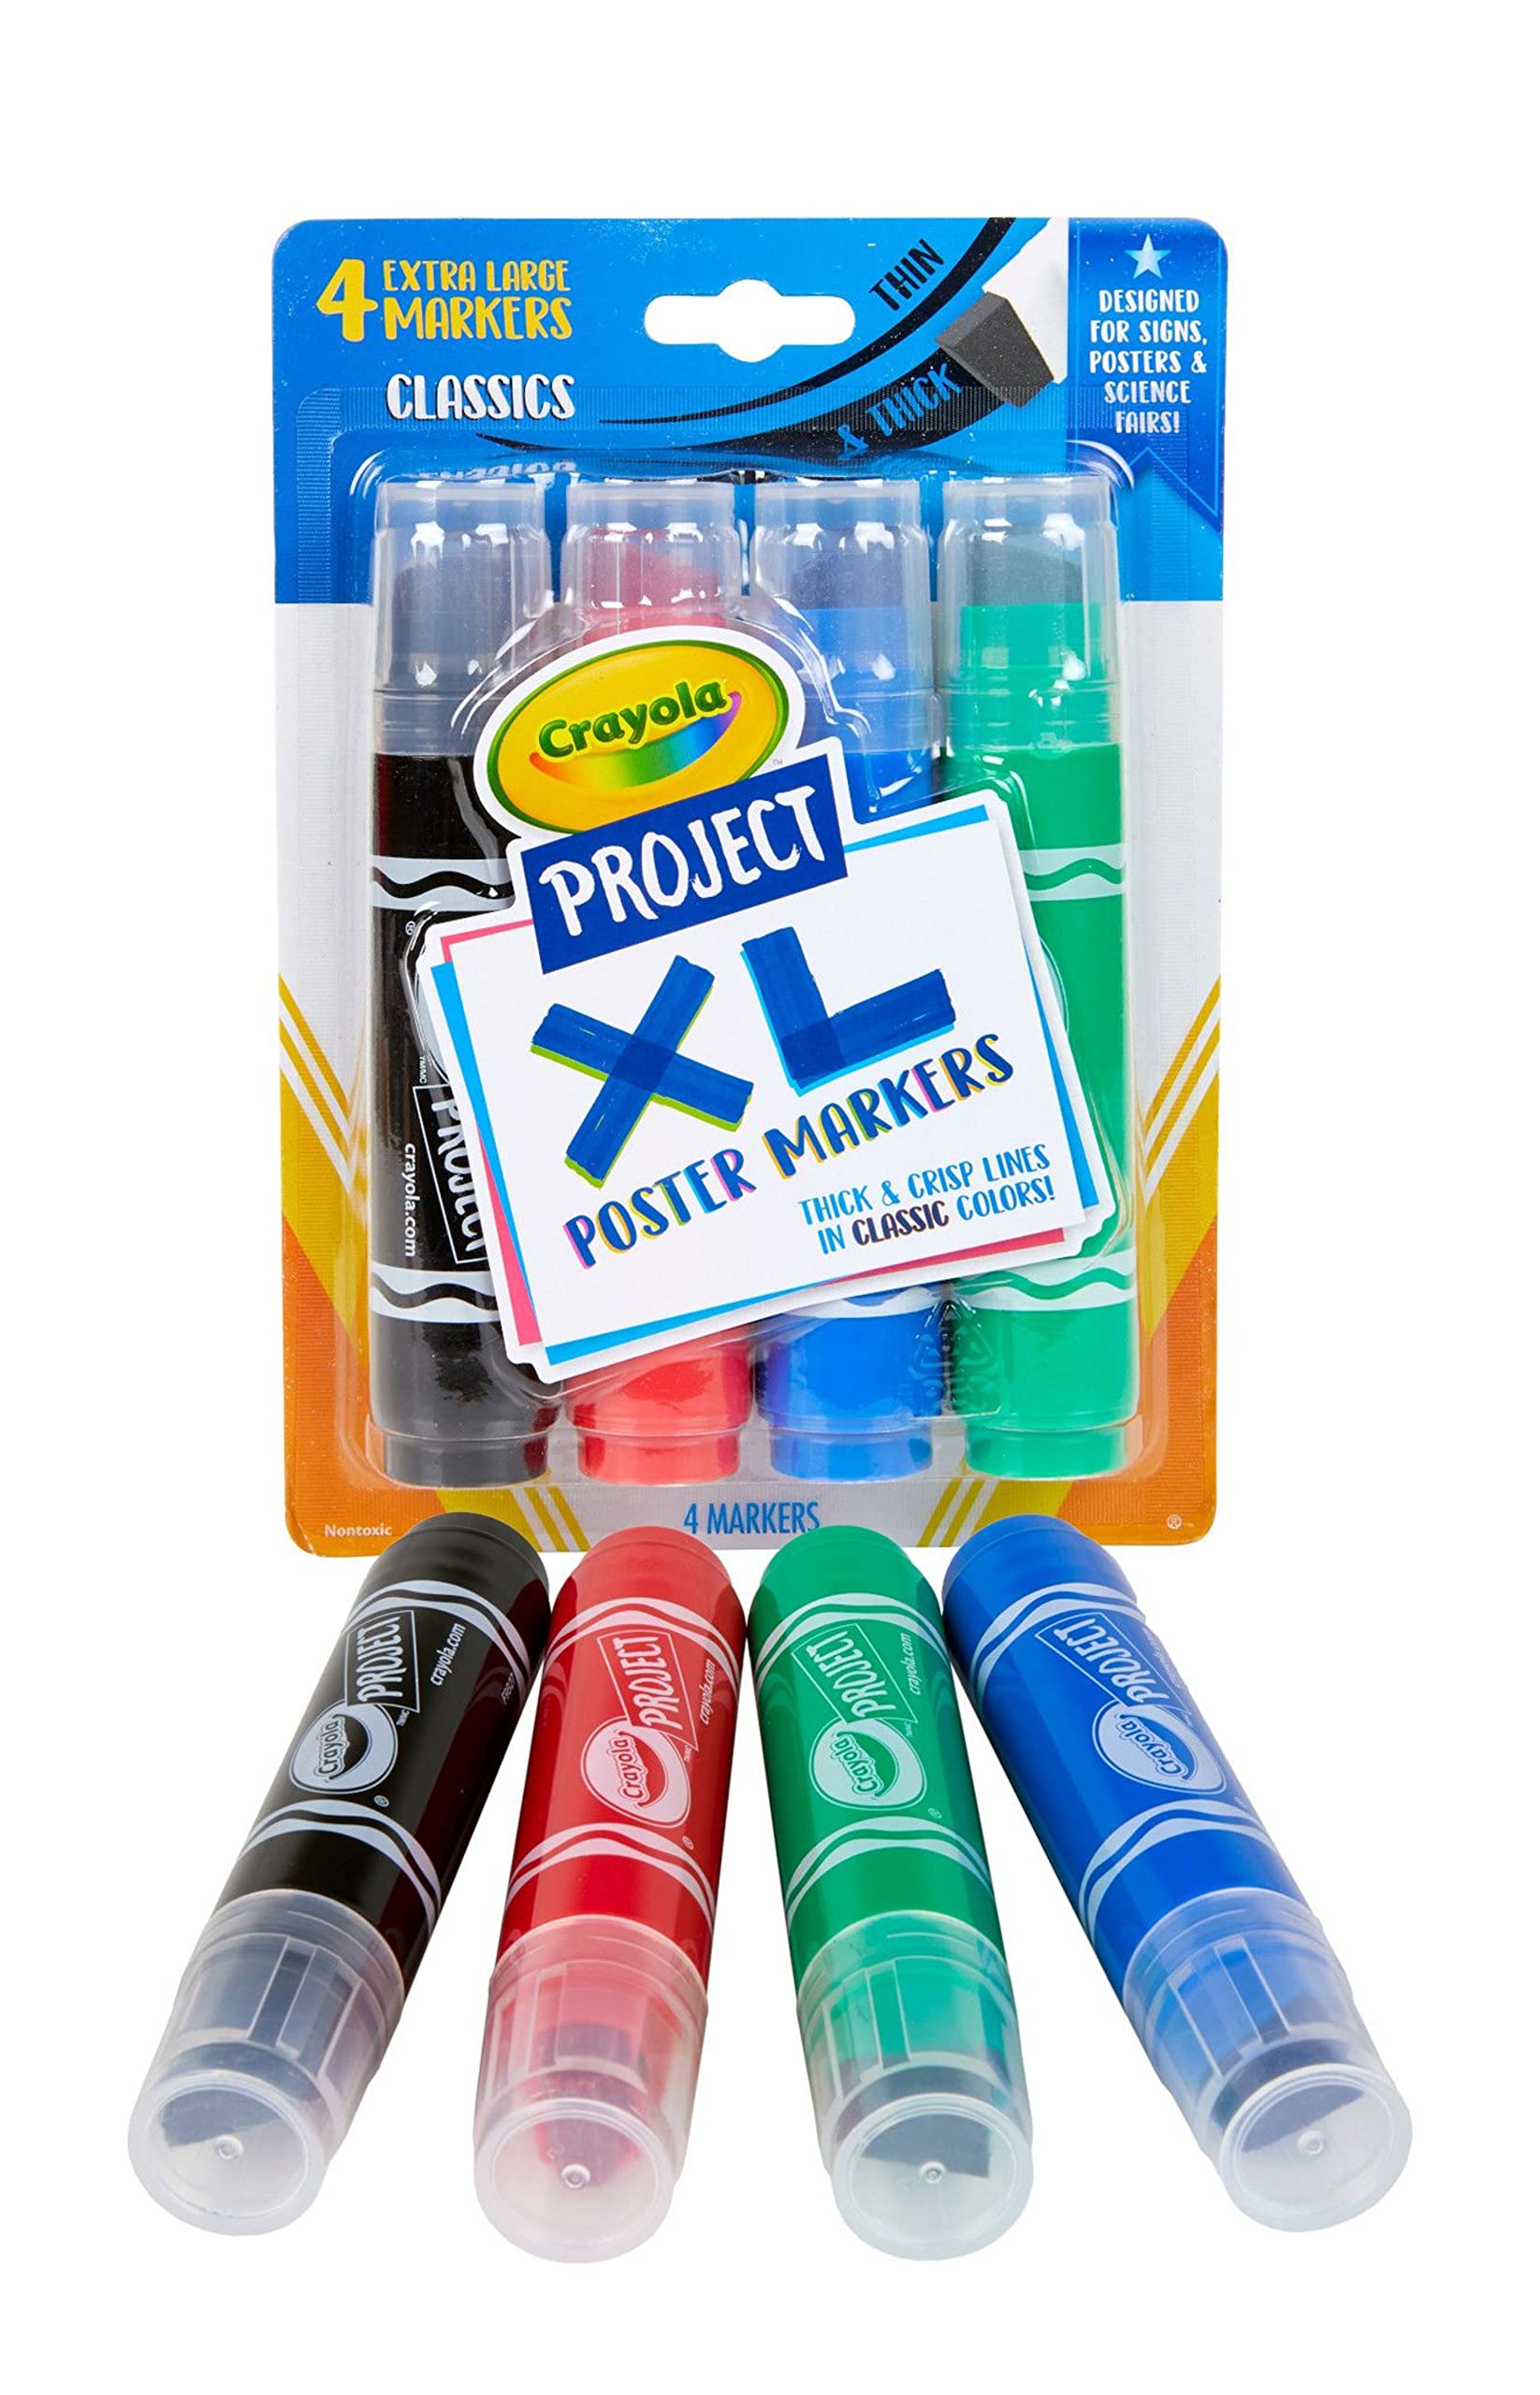 Crayola XL Poster Markers, Assorted Classic Colors, School Supplies, 4 Count